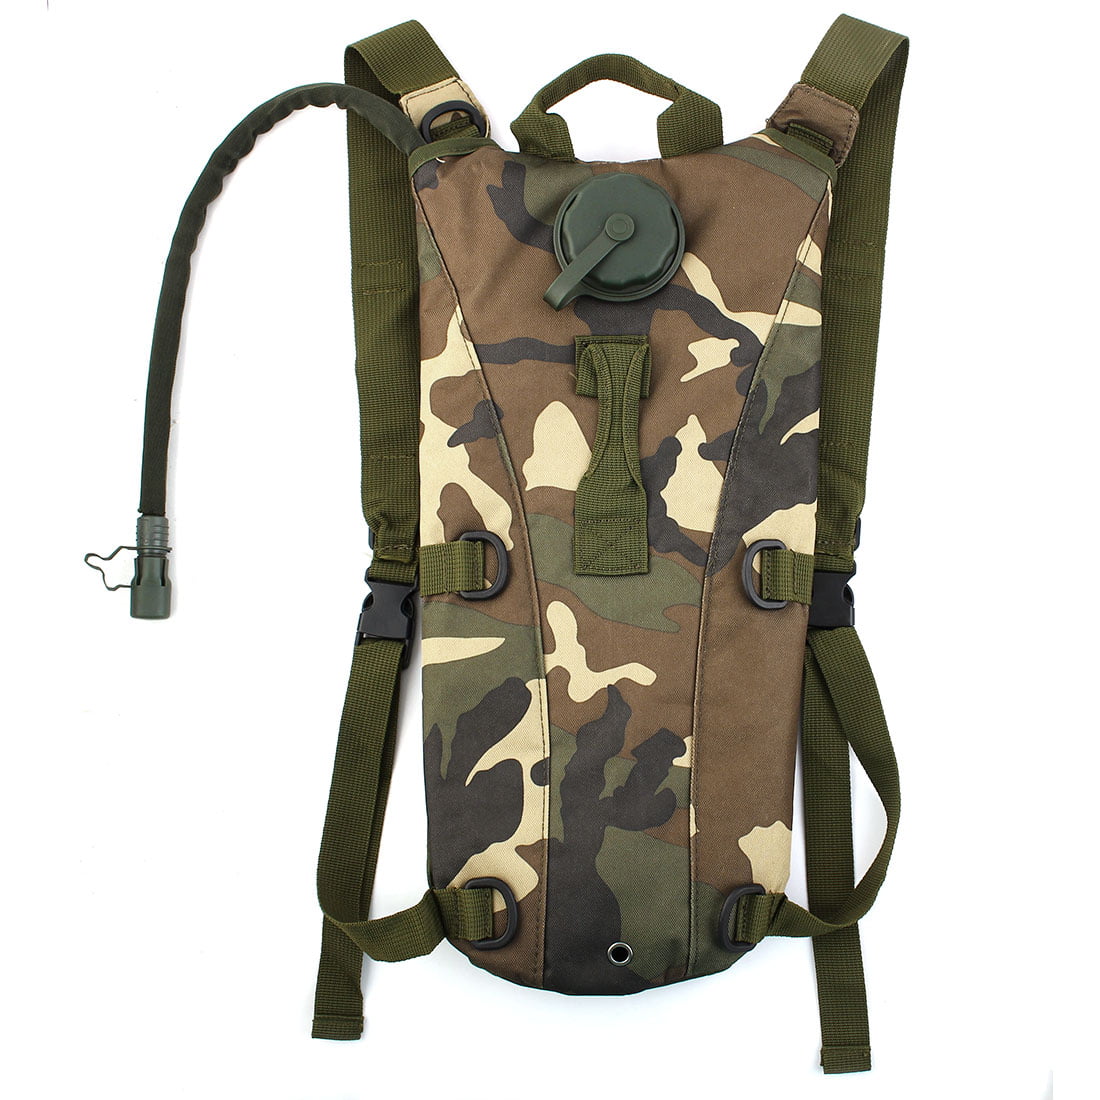 Ideal for Molle Rucksacks Camping Hiking Olive Green 2.5L WATER BLADDER 